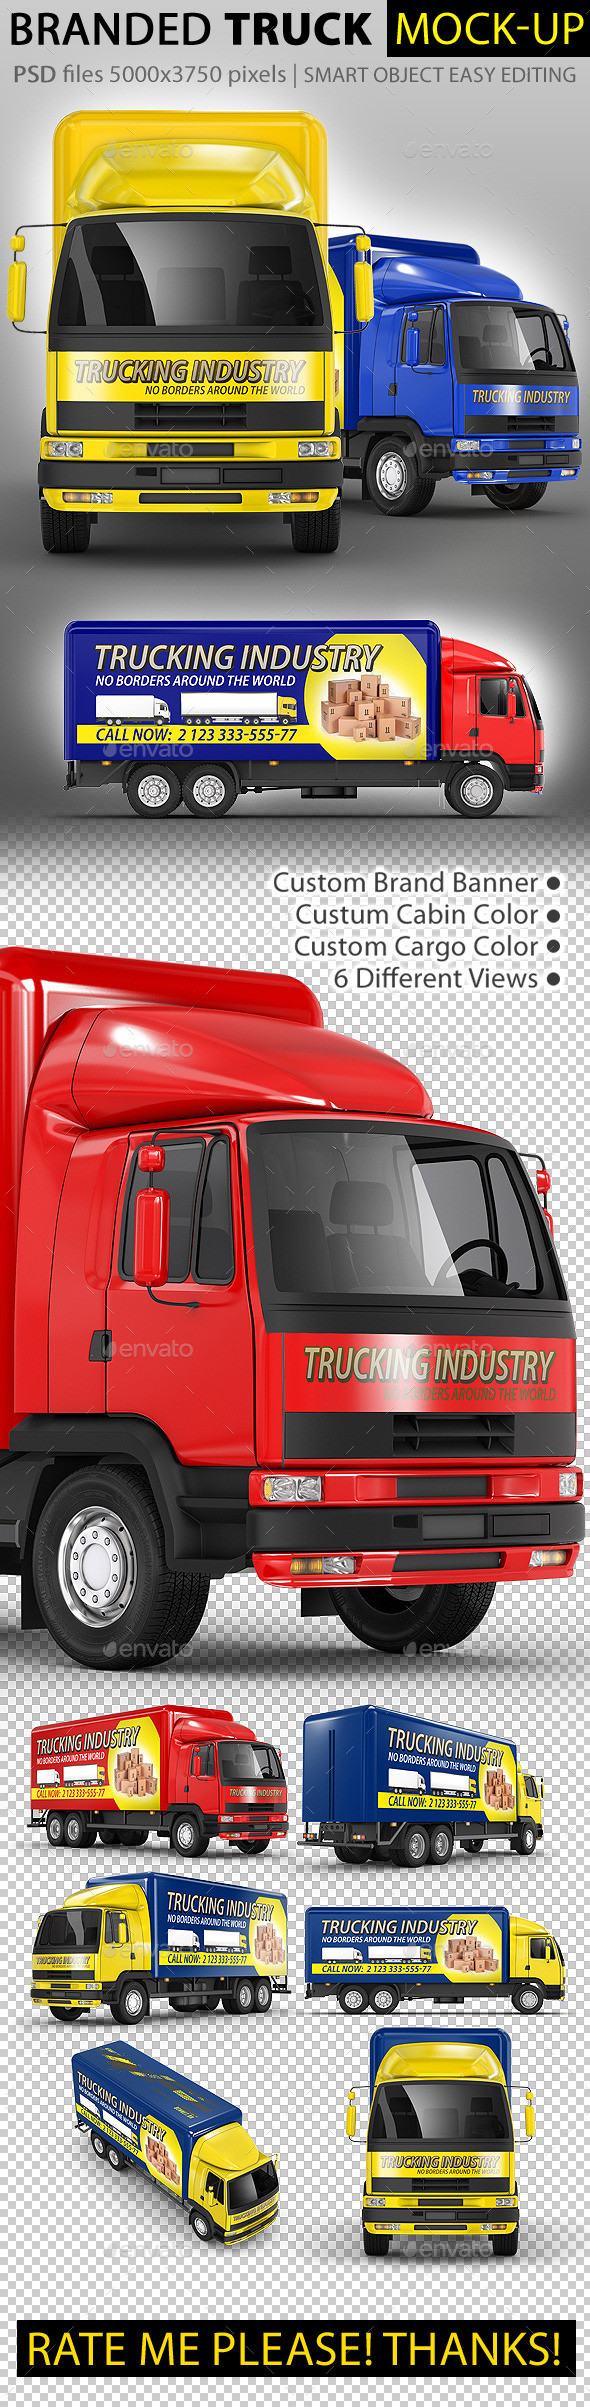 Preview truck2